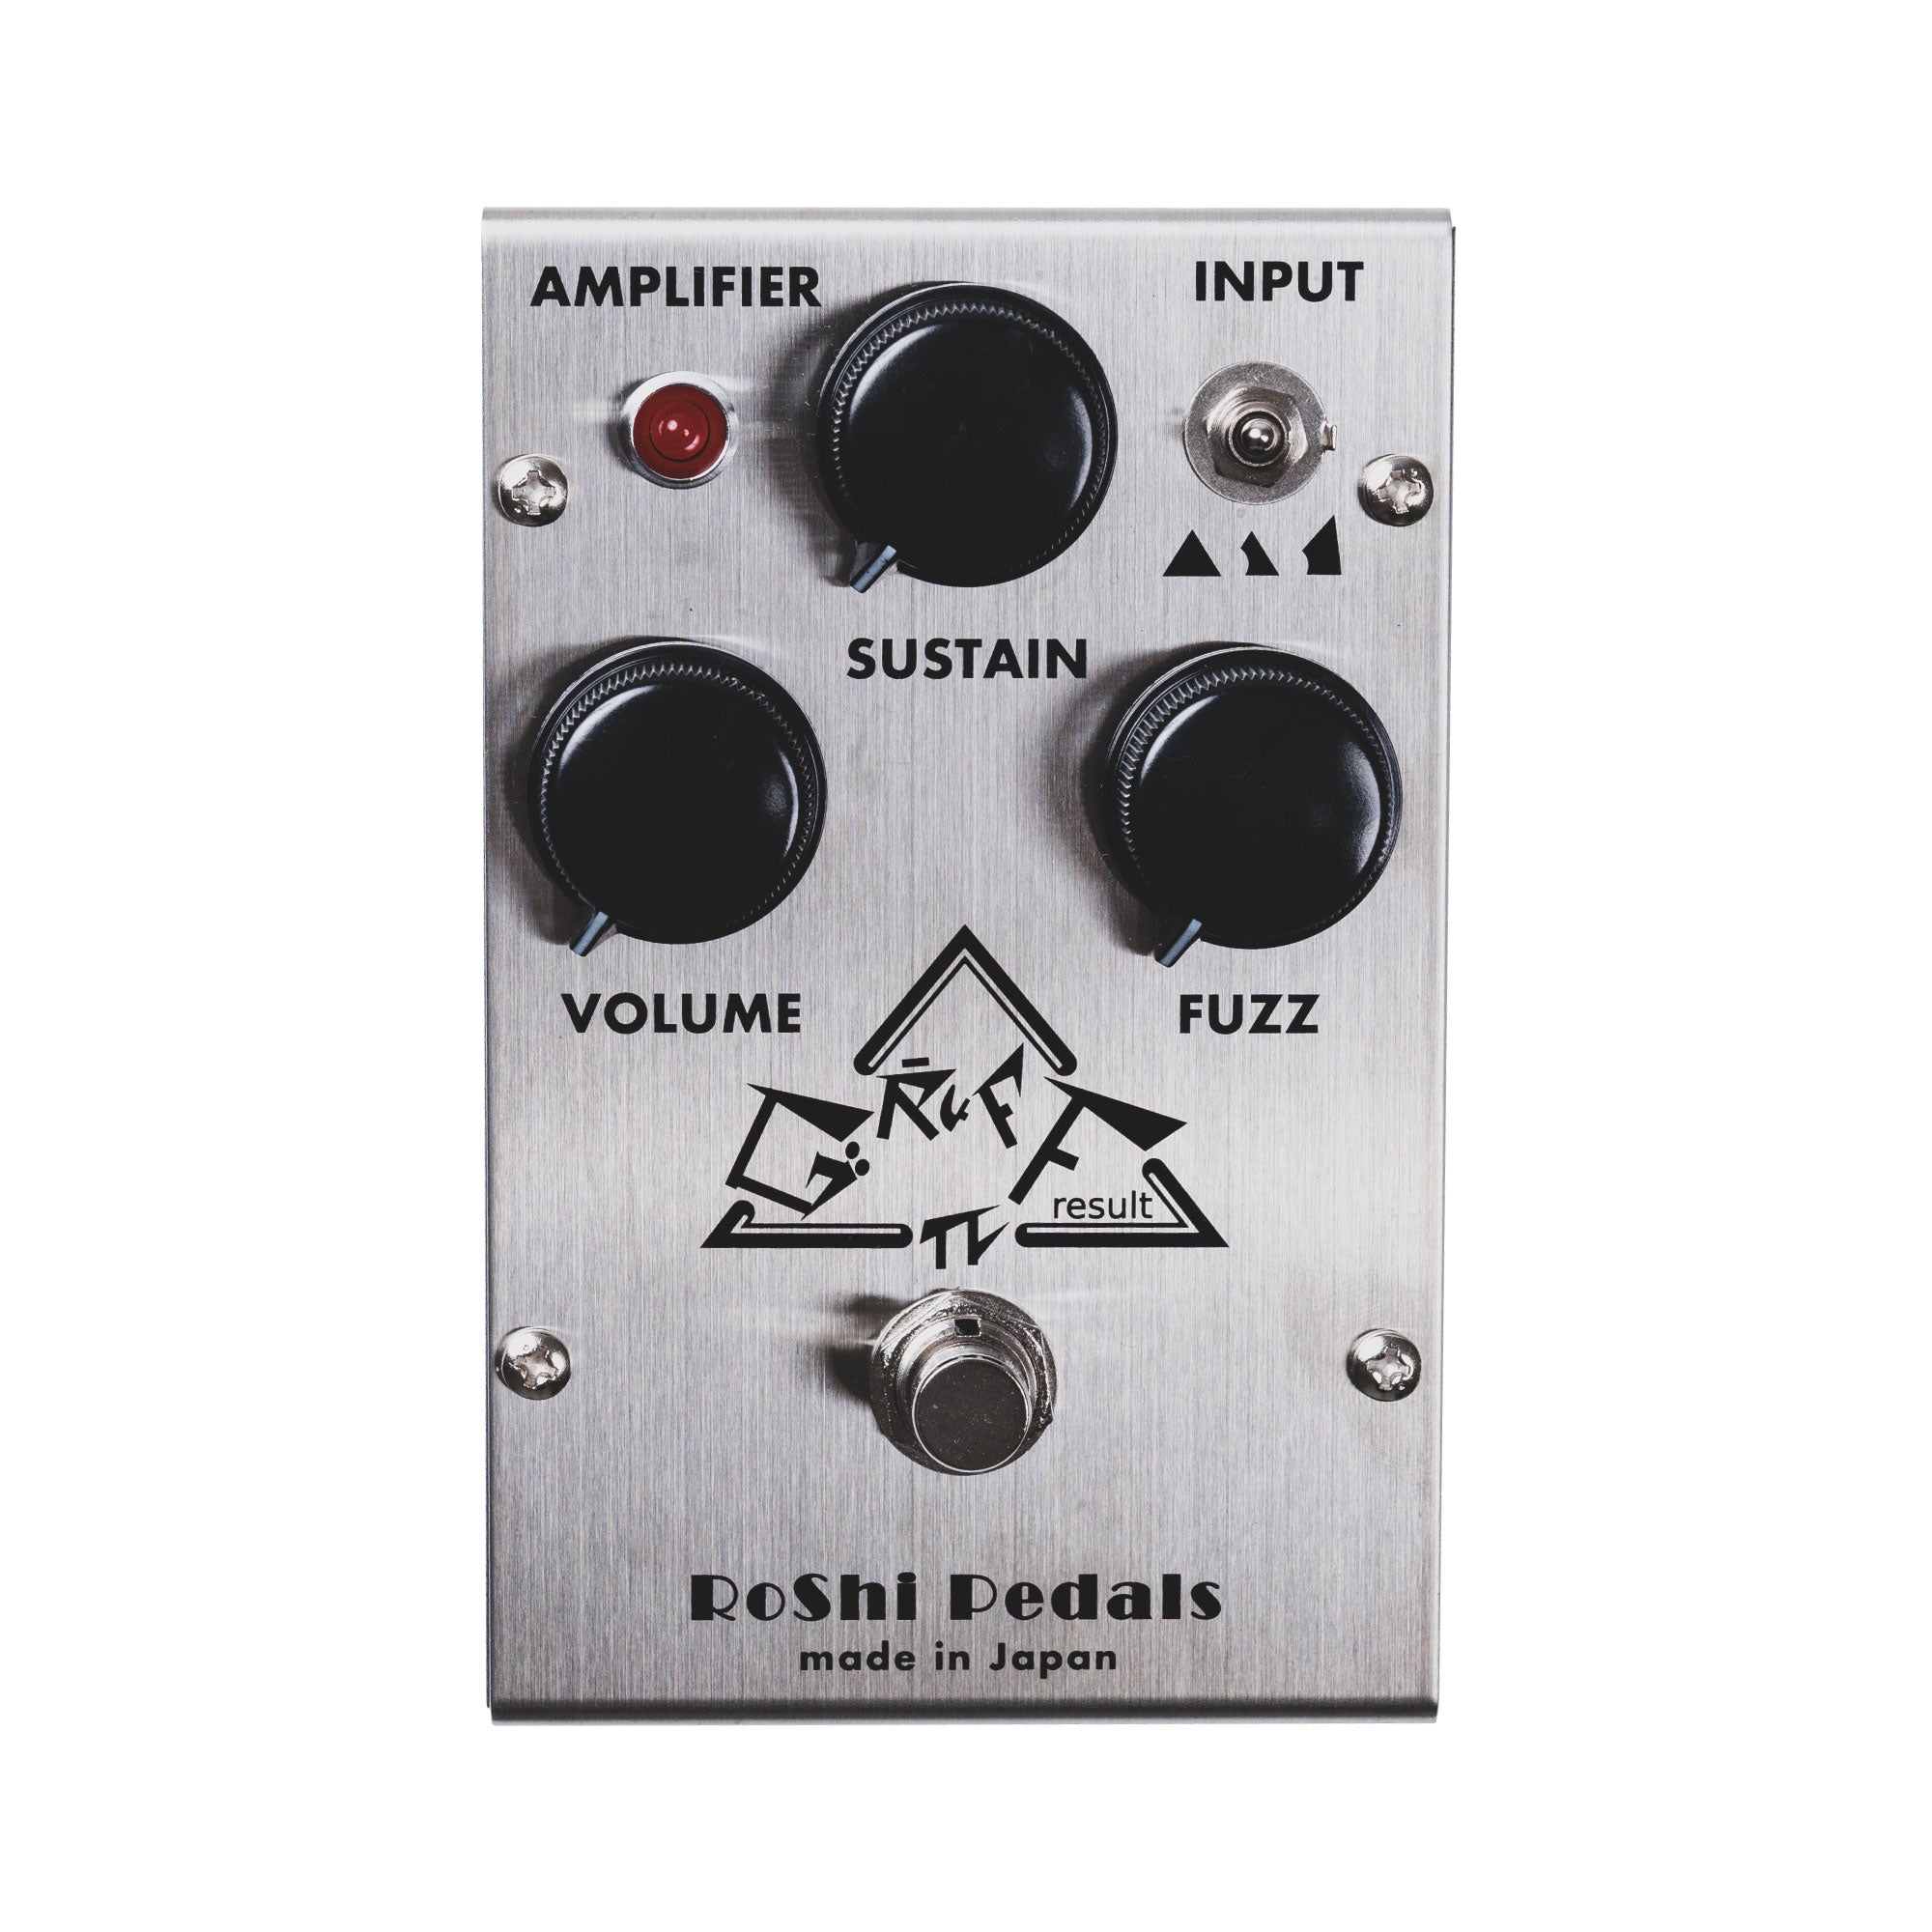 GRUFF result – RoShi Pedals